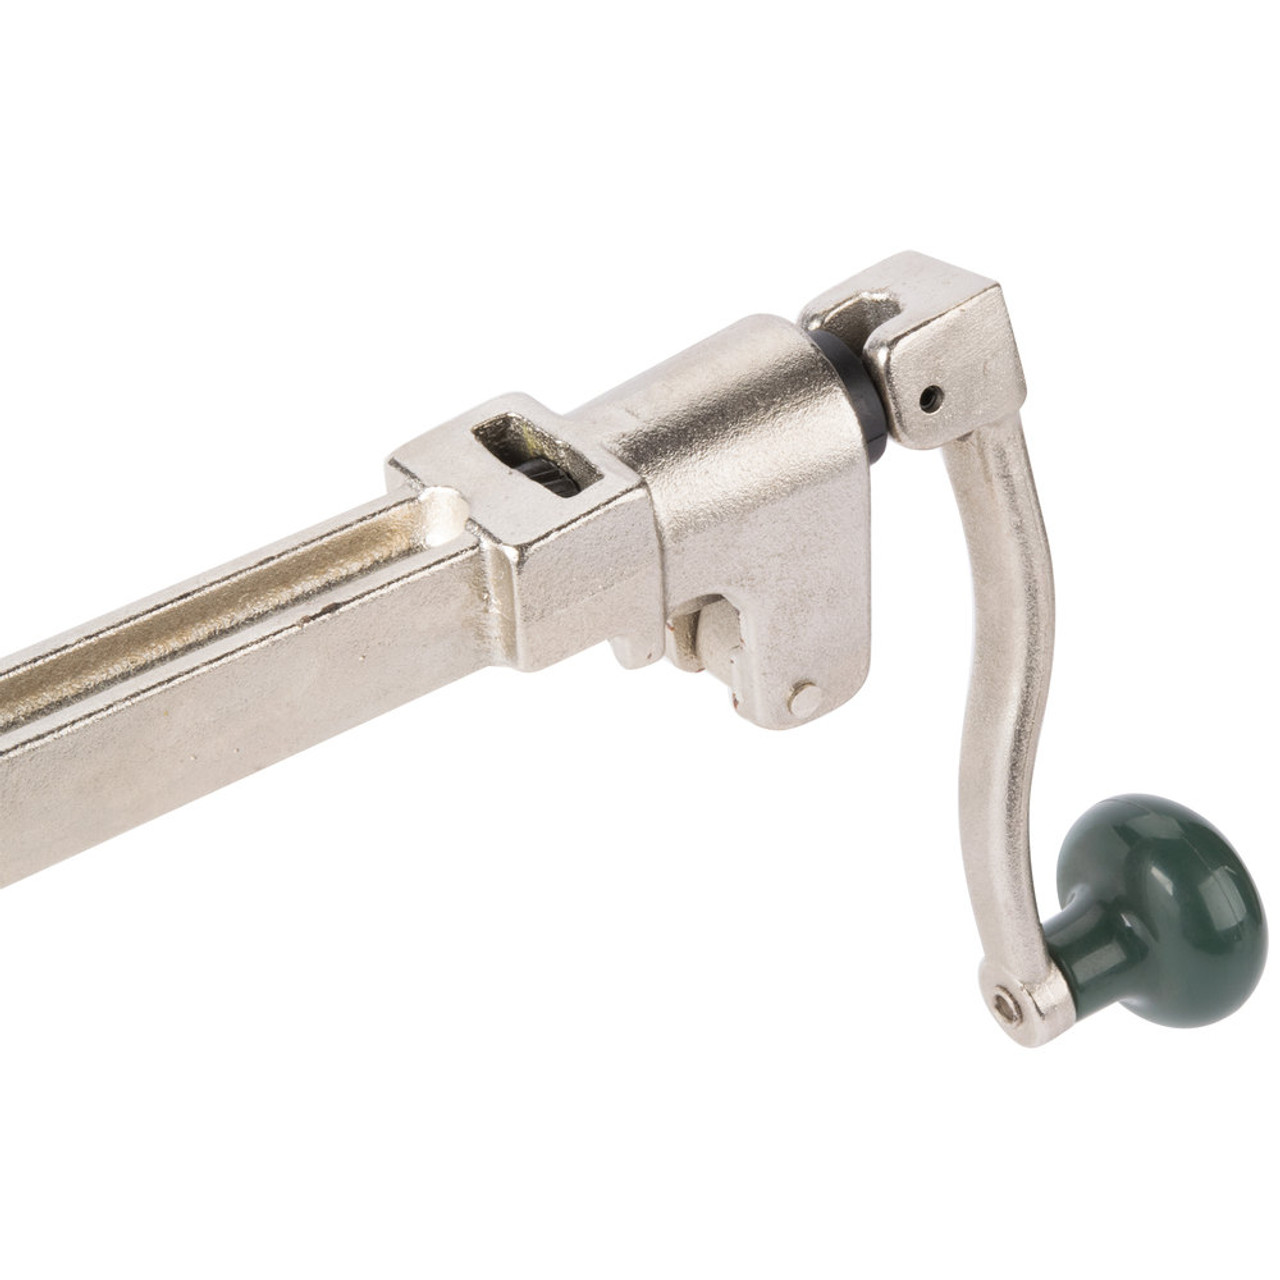 Heavy Duty Manual Can Opener with Stainless Steel Plate - China